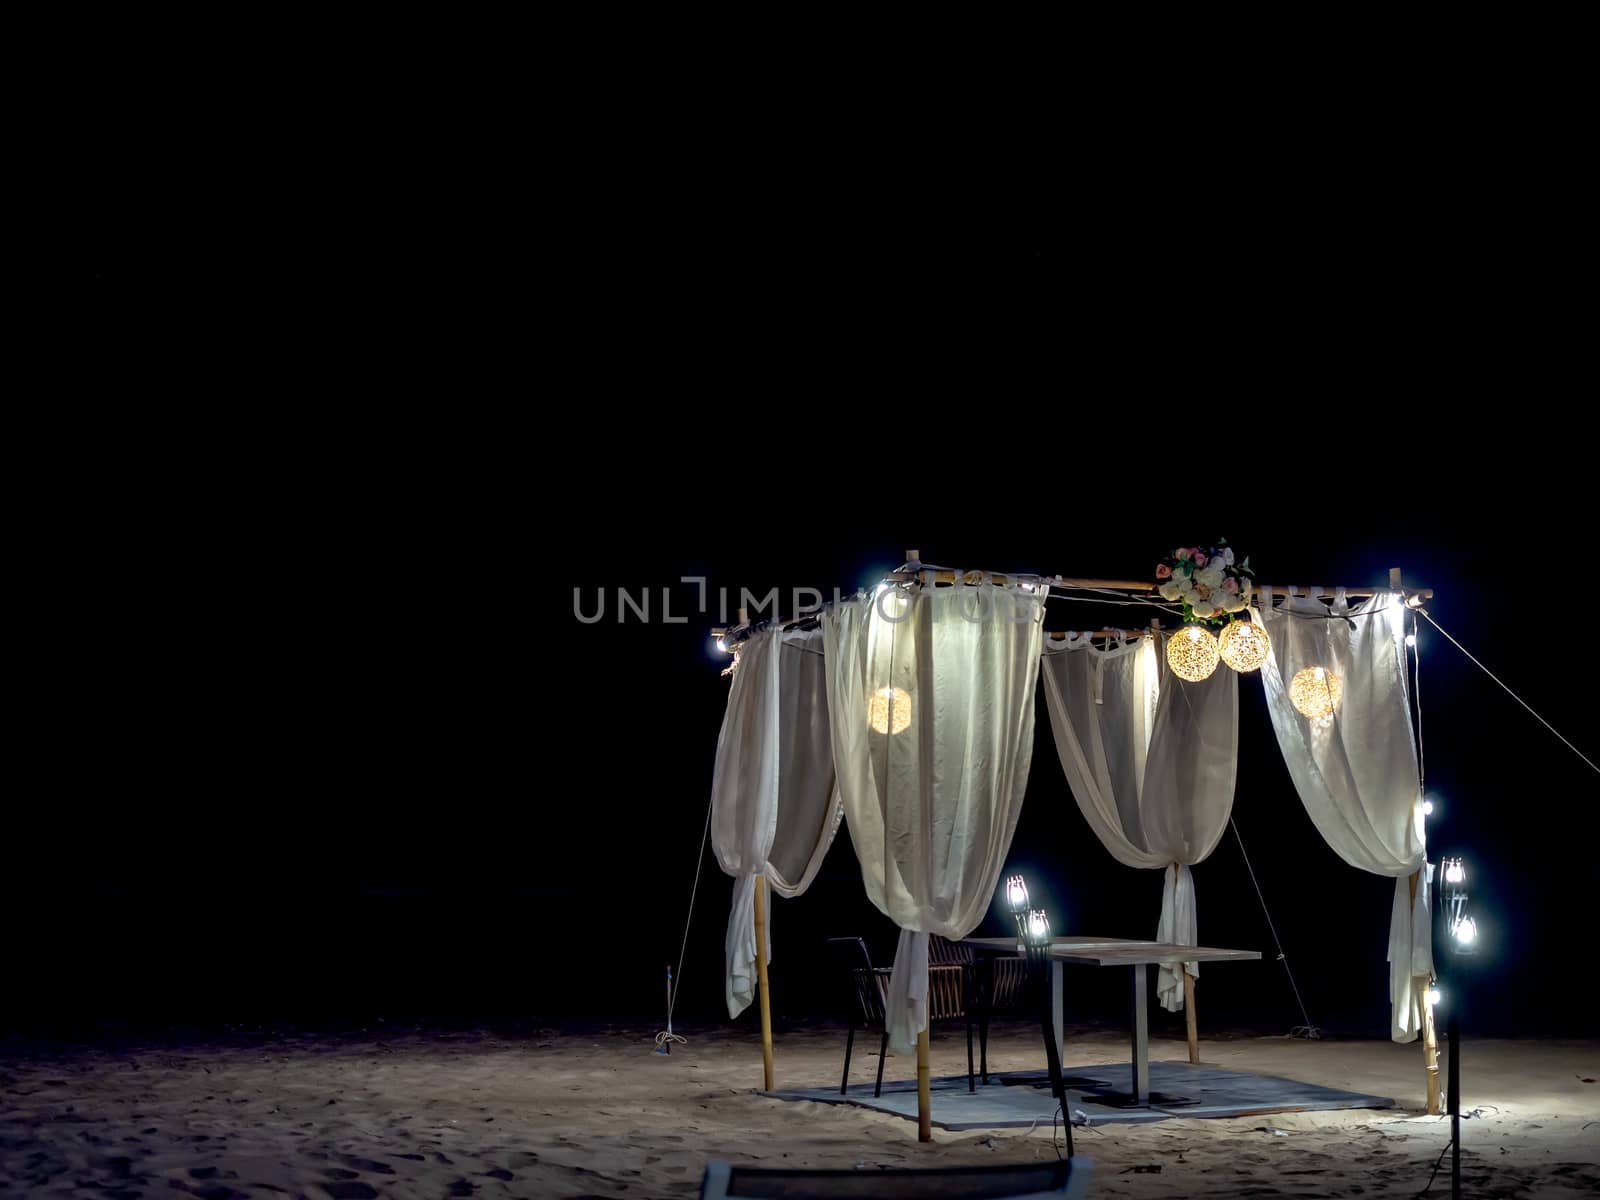 Romantic dining table, ornament with wood, lamp and white fabric on the beach at night on dark background.